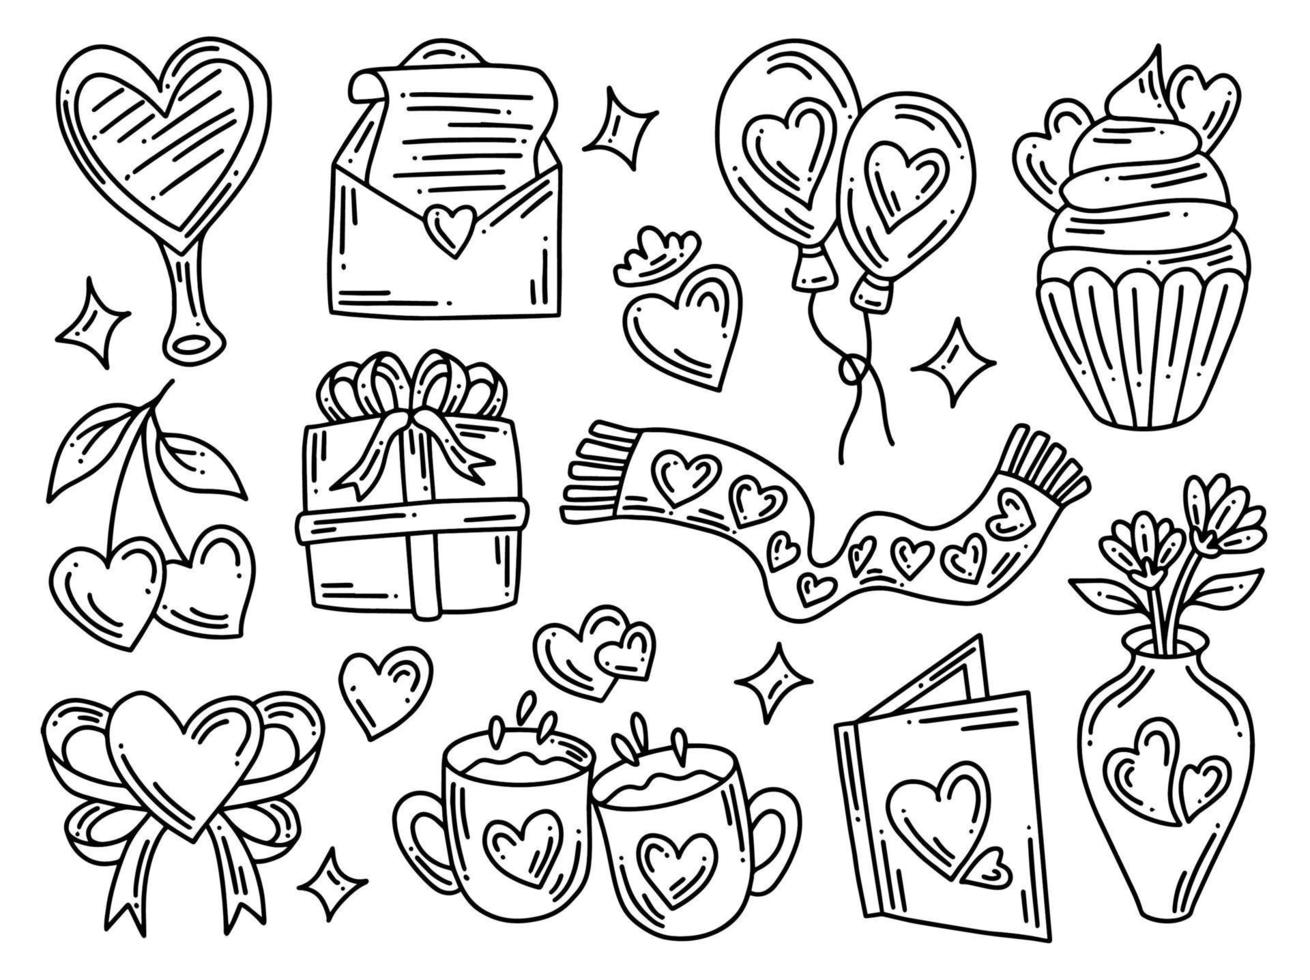 Valentines Day Element Collection Doodle vector